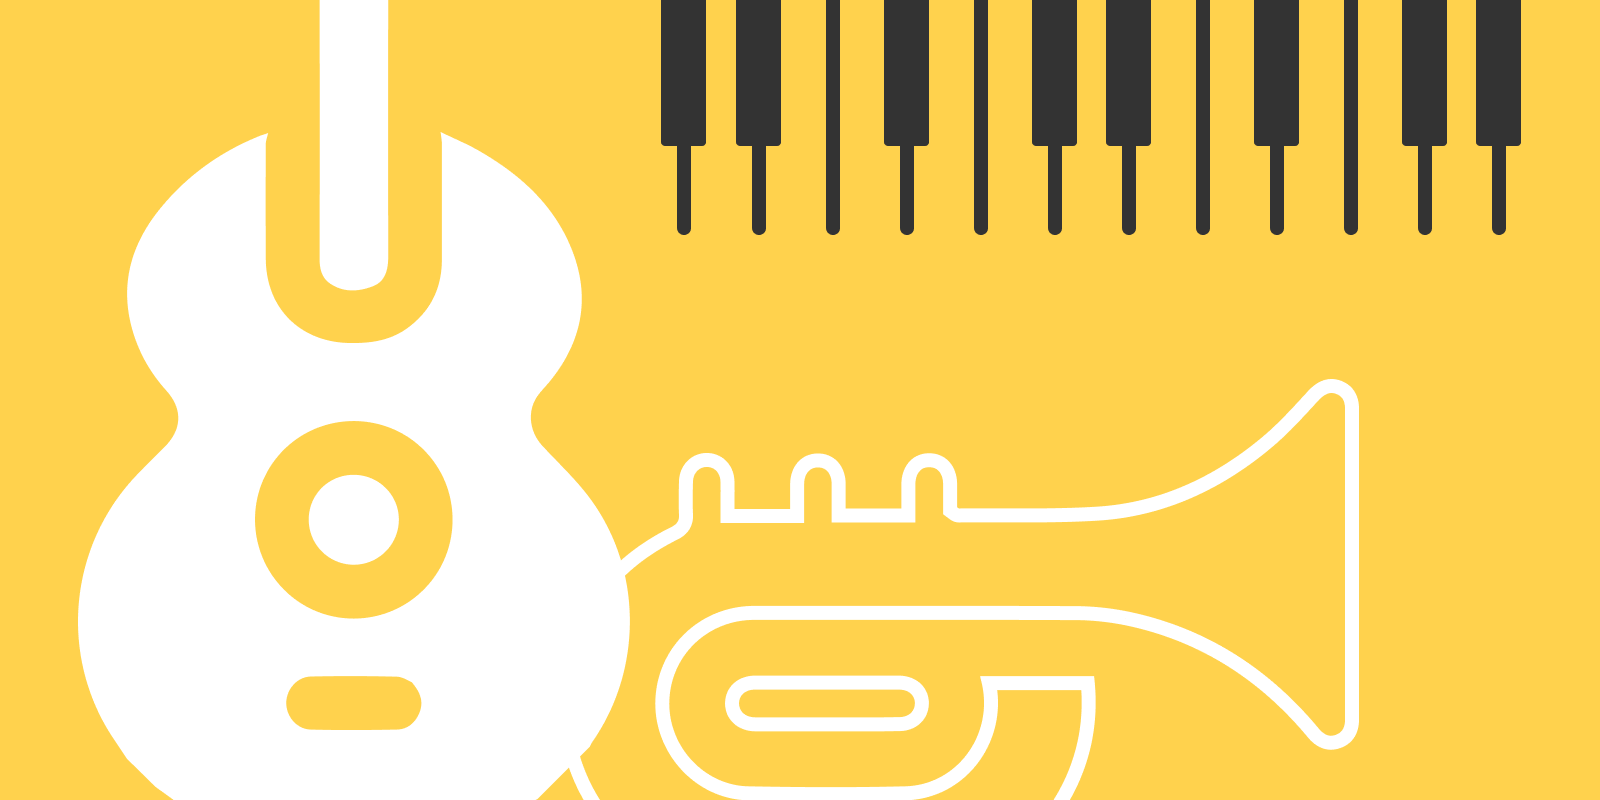 Monetizing your skills by teaching music online, the image shows a guitar, piano, and a saxophone.